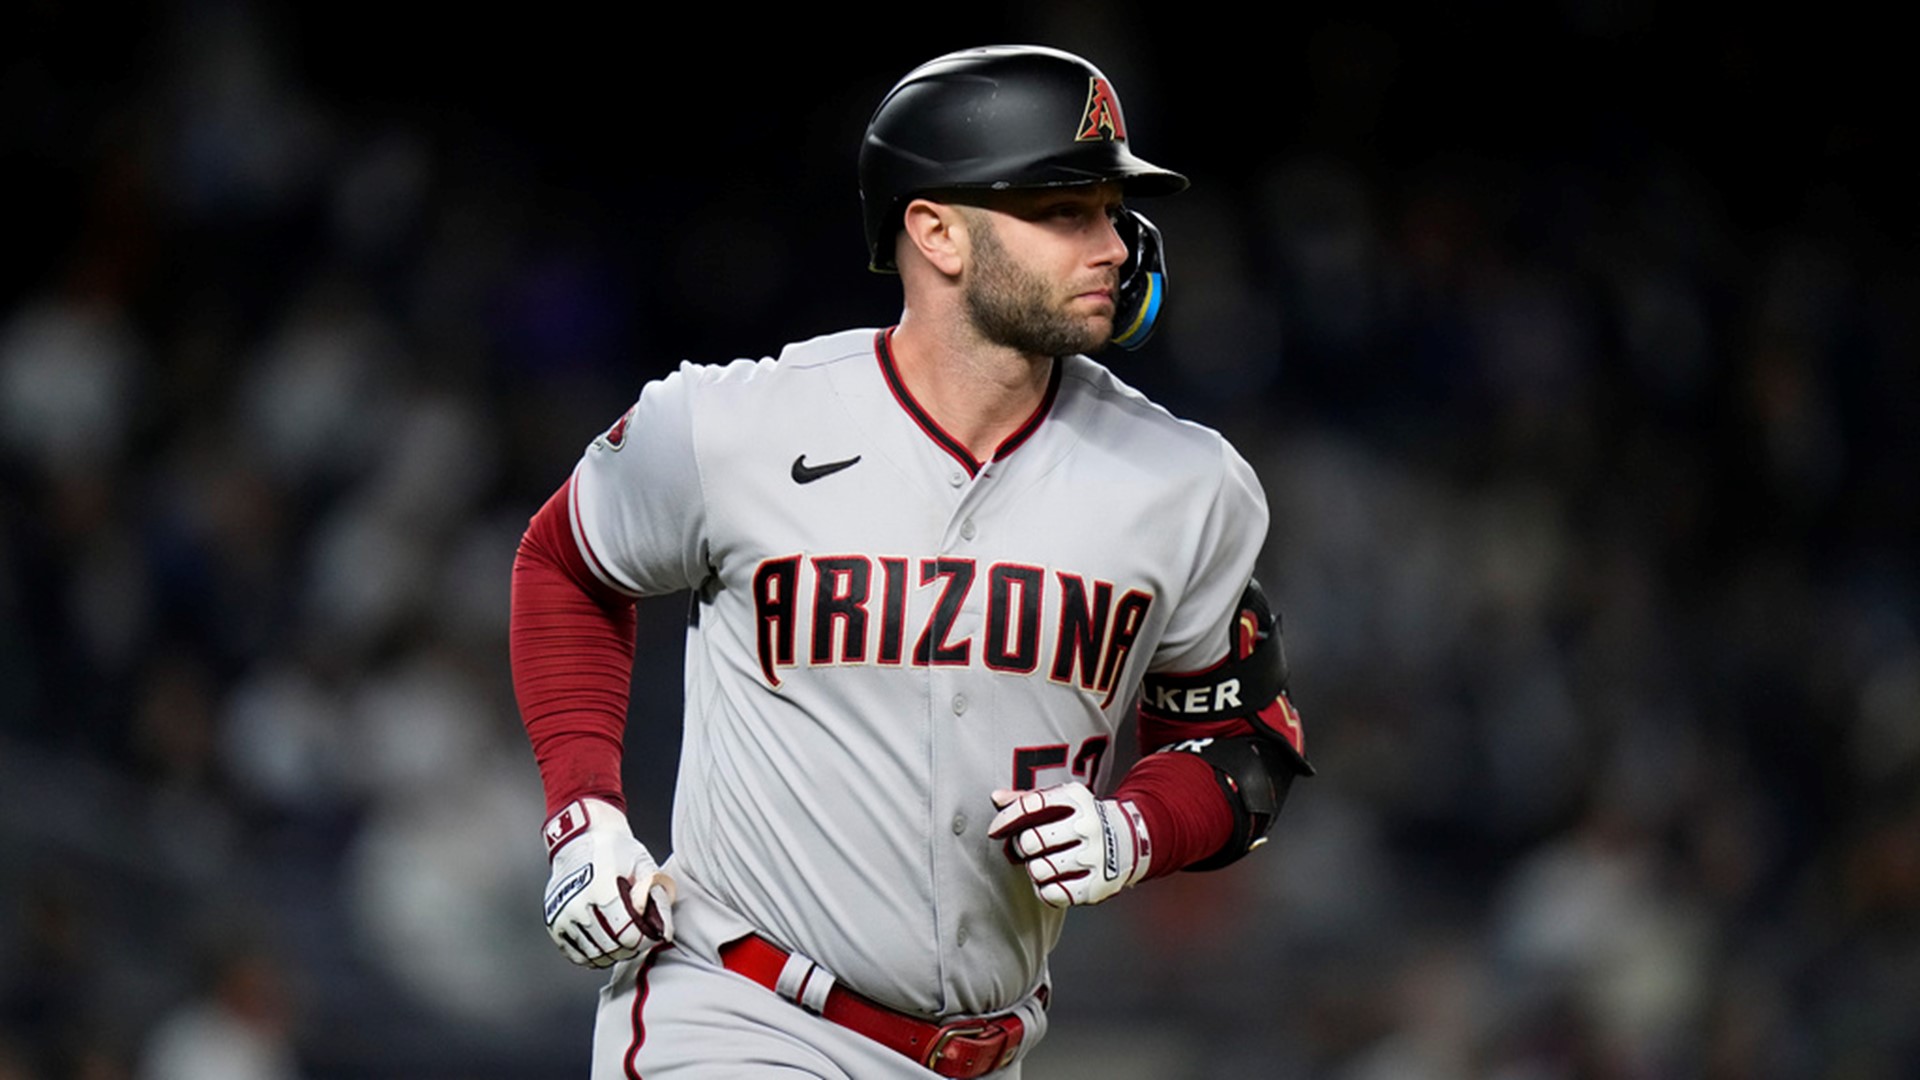 The D-backs are back in the postseason for the first time since 2017 and are relying on playing their brand of baseball.